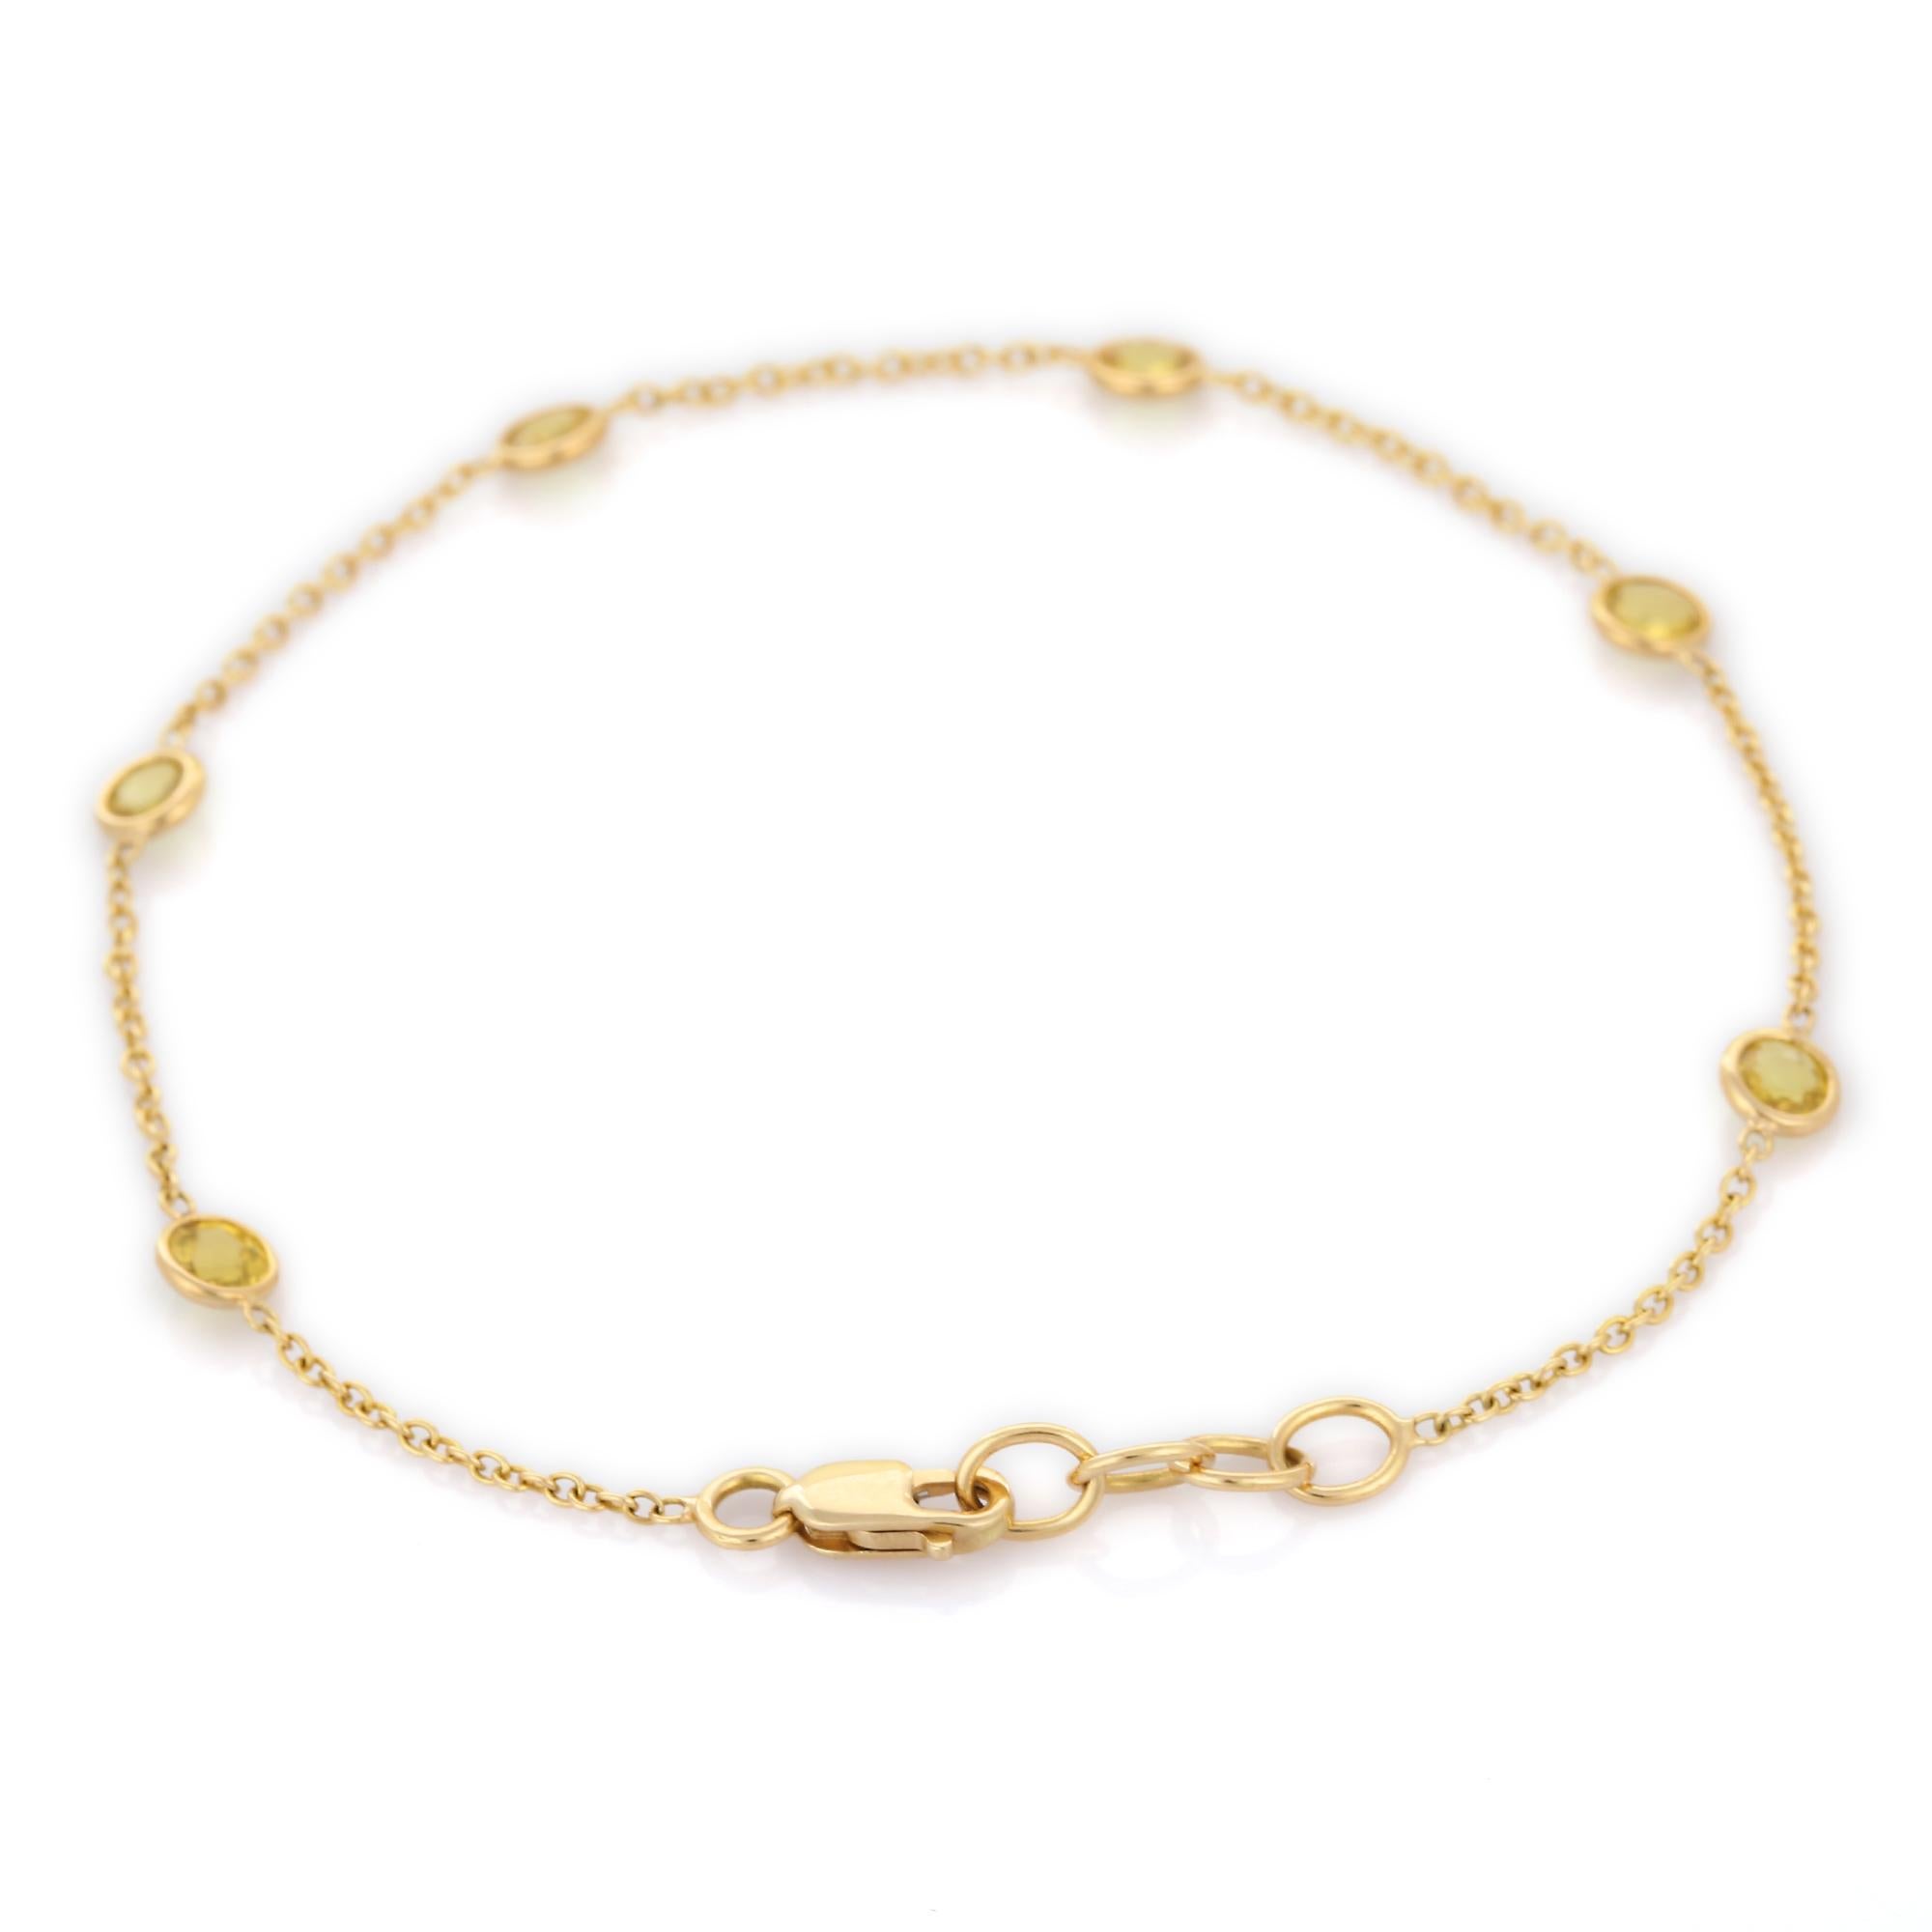 Modern Minimalist Round Cut Yellow Sapphire Chain Bracelet Mounted in 18K Yellow Gold For Sale